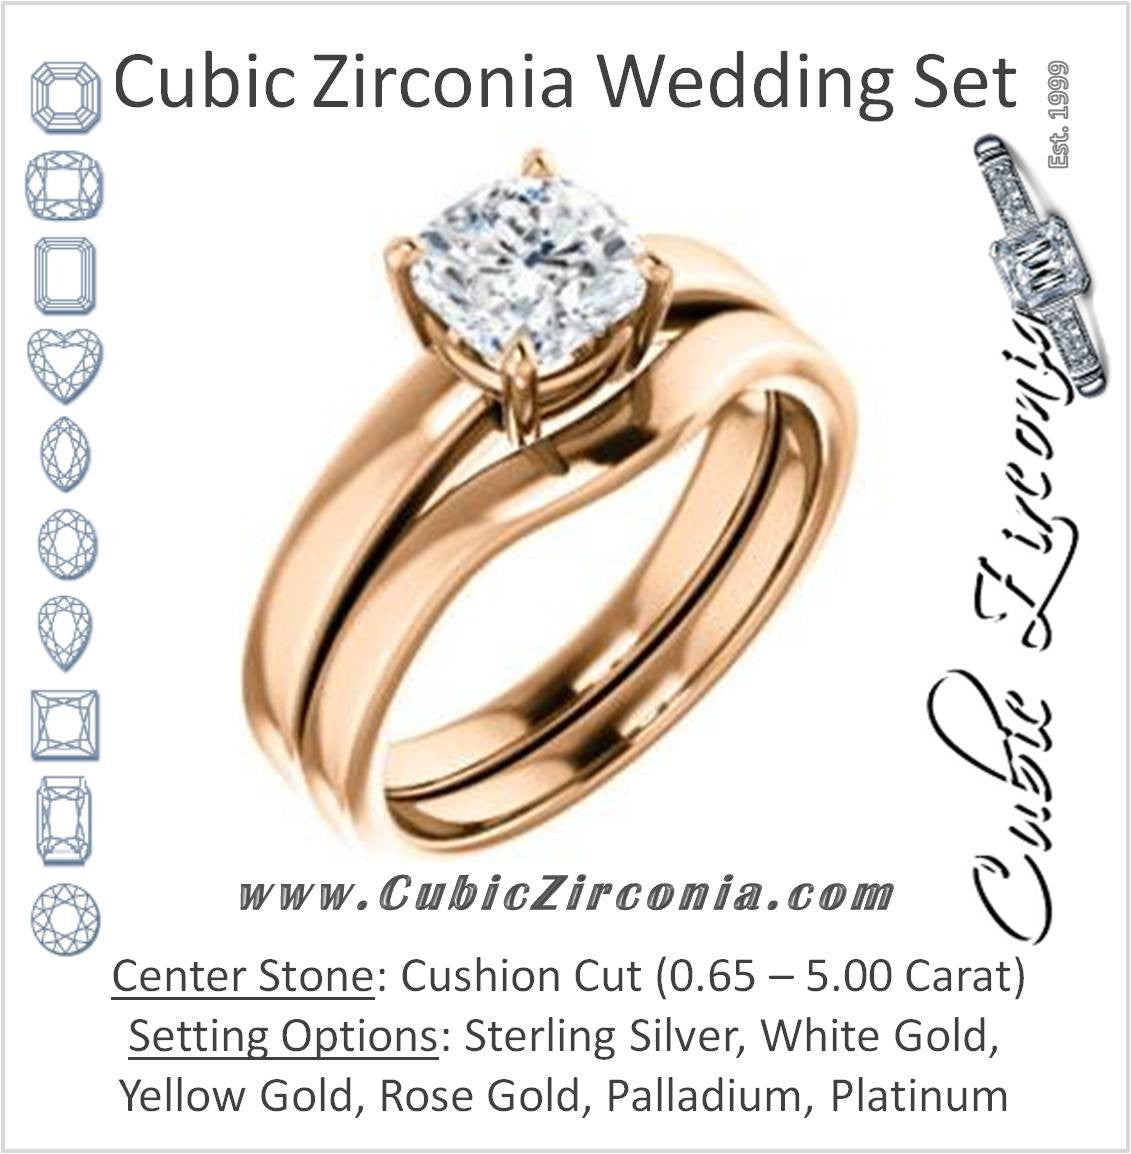 CZ Wedding Set, featuring The Myaka engagement ring (Customizable Cushion Cut Solitaire with Medium Band)